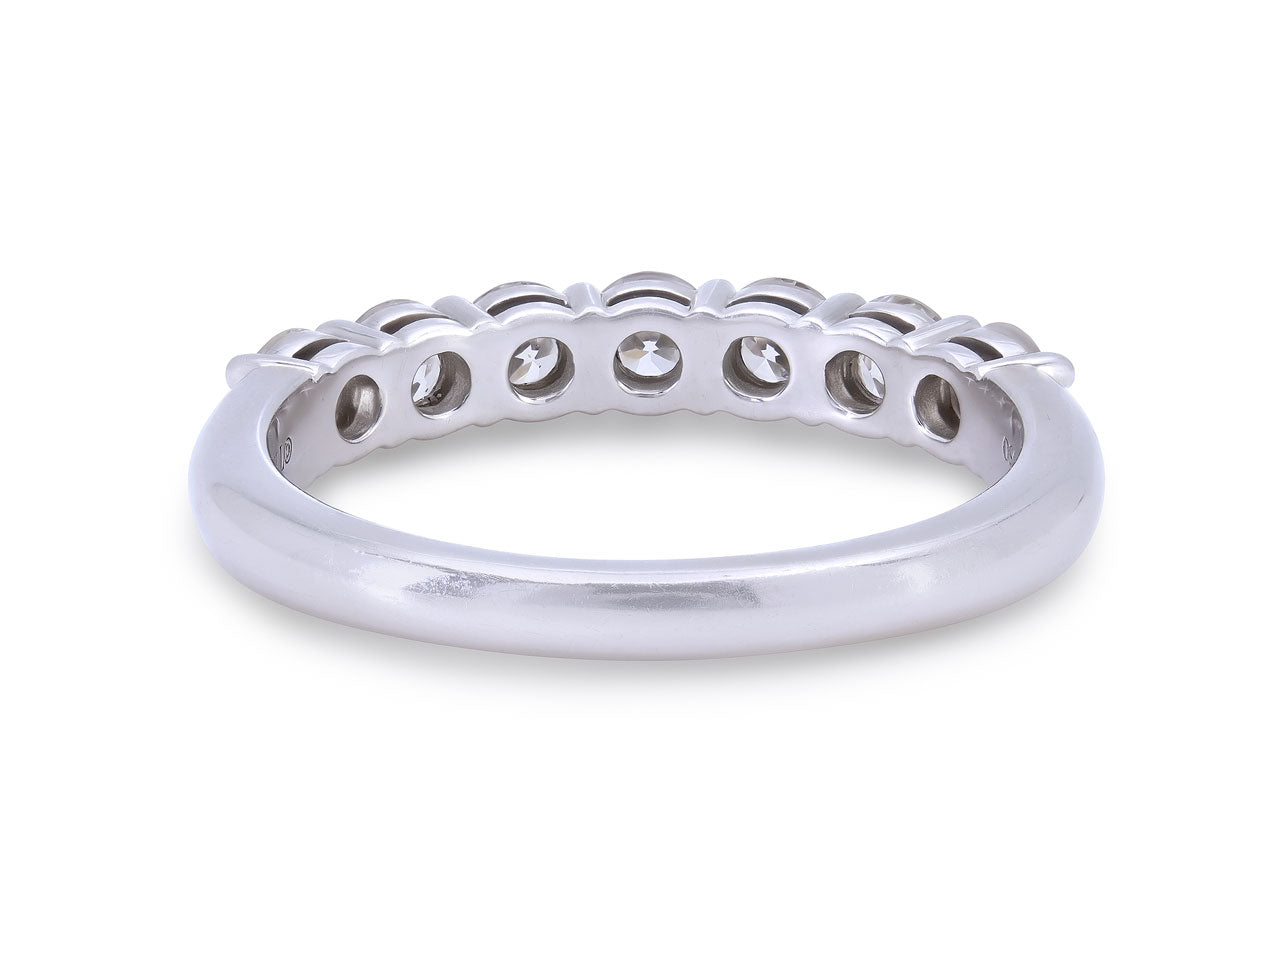 Tiffany & Co. 'Forever' Diamond Band in Platinum